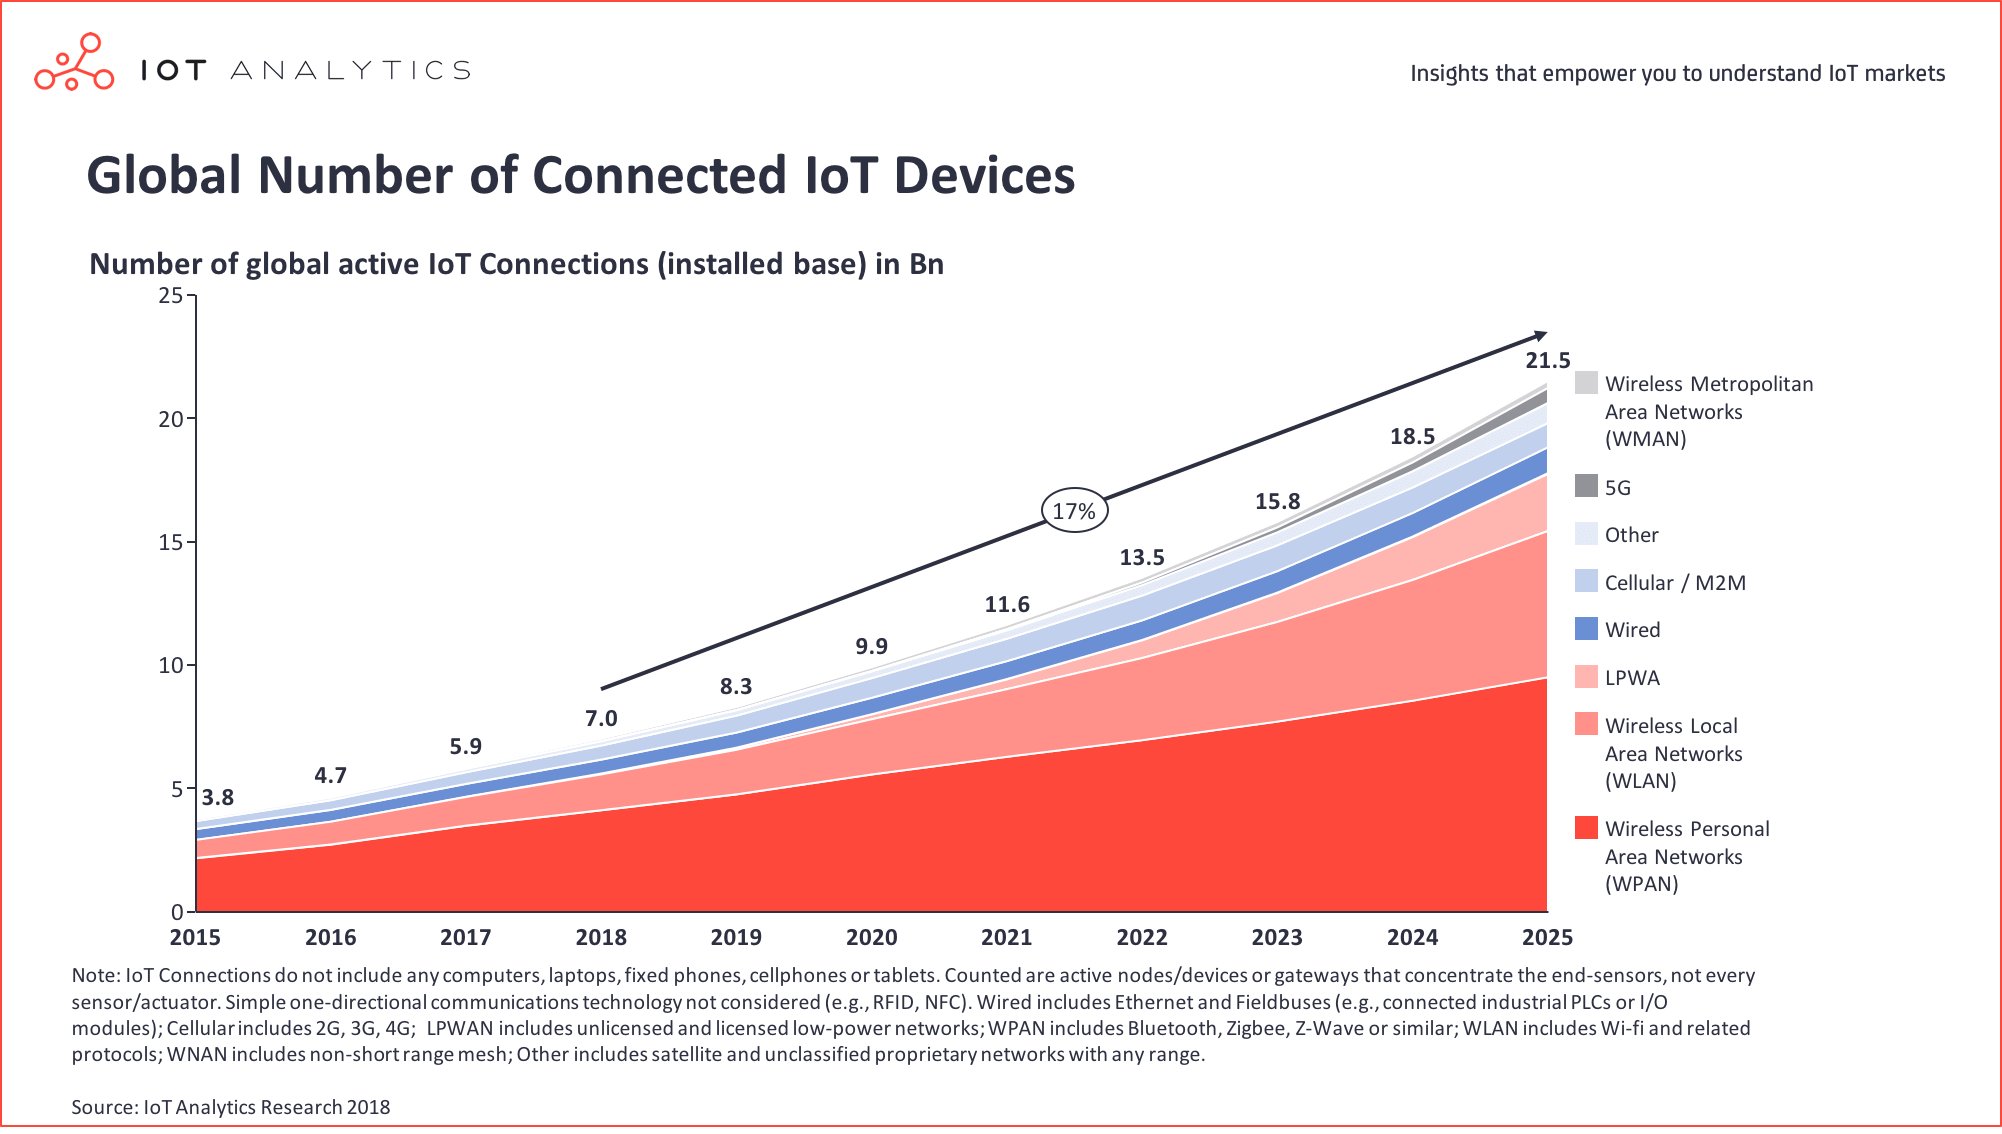 Global Number of Connected IoT Devices